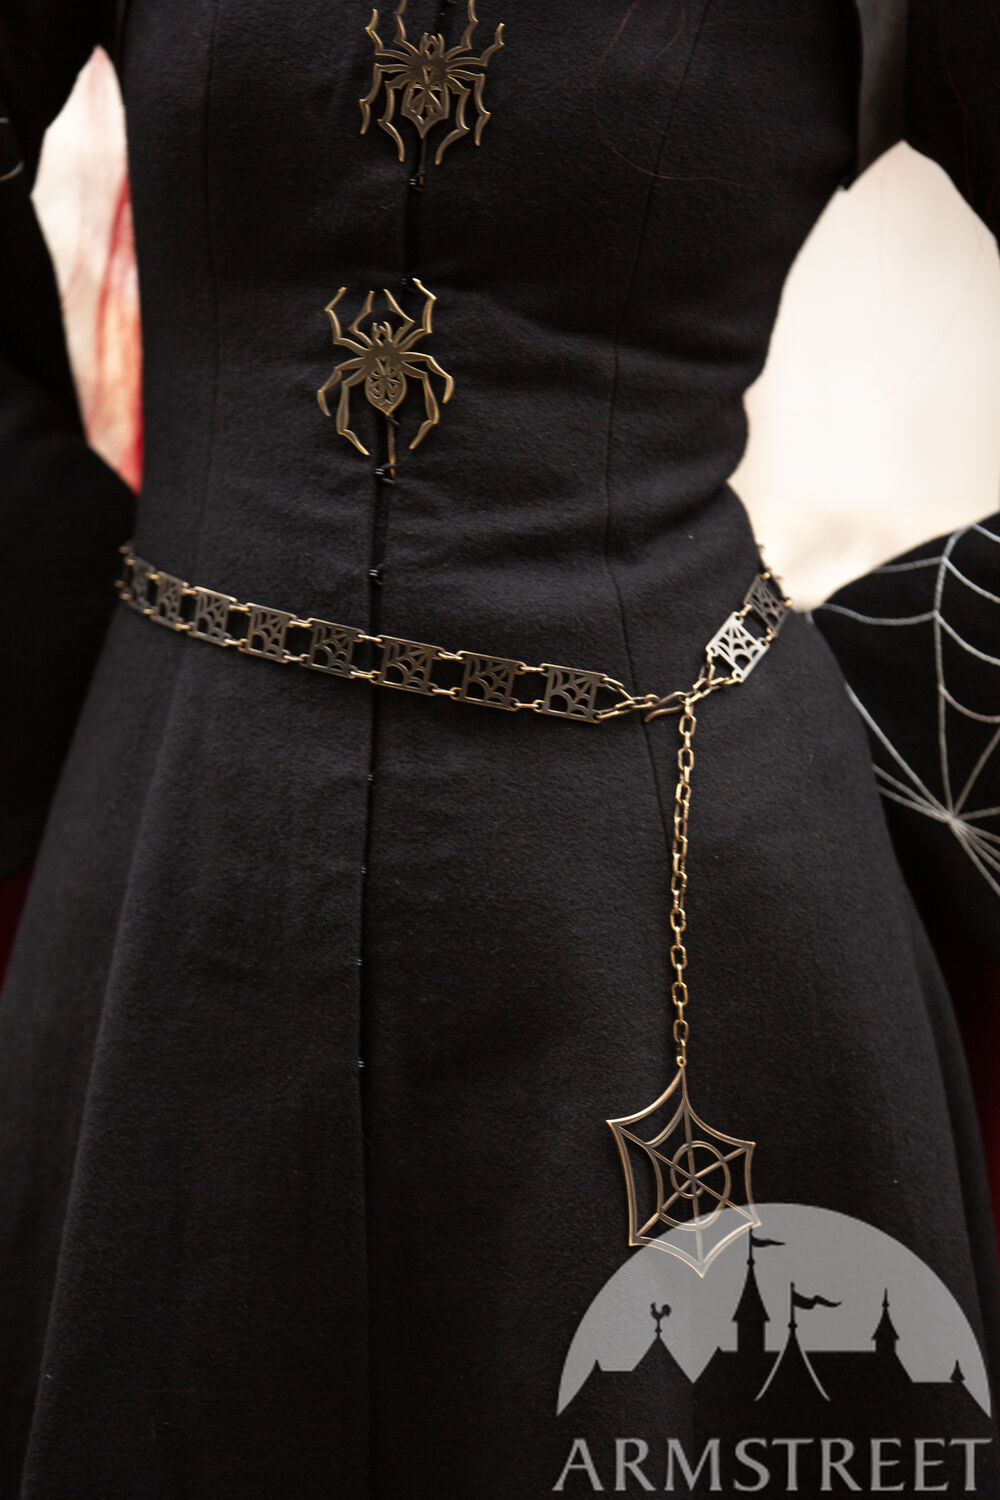 Spiderweb brass belt from Moonless Night collection